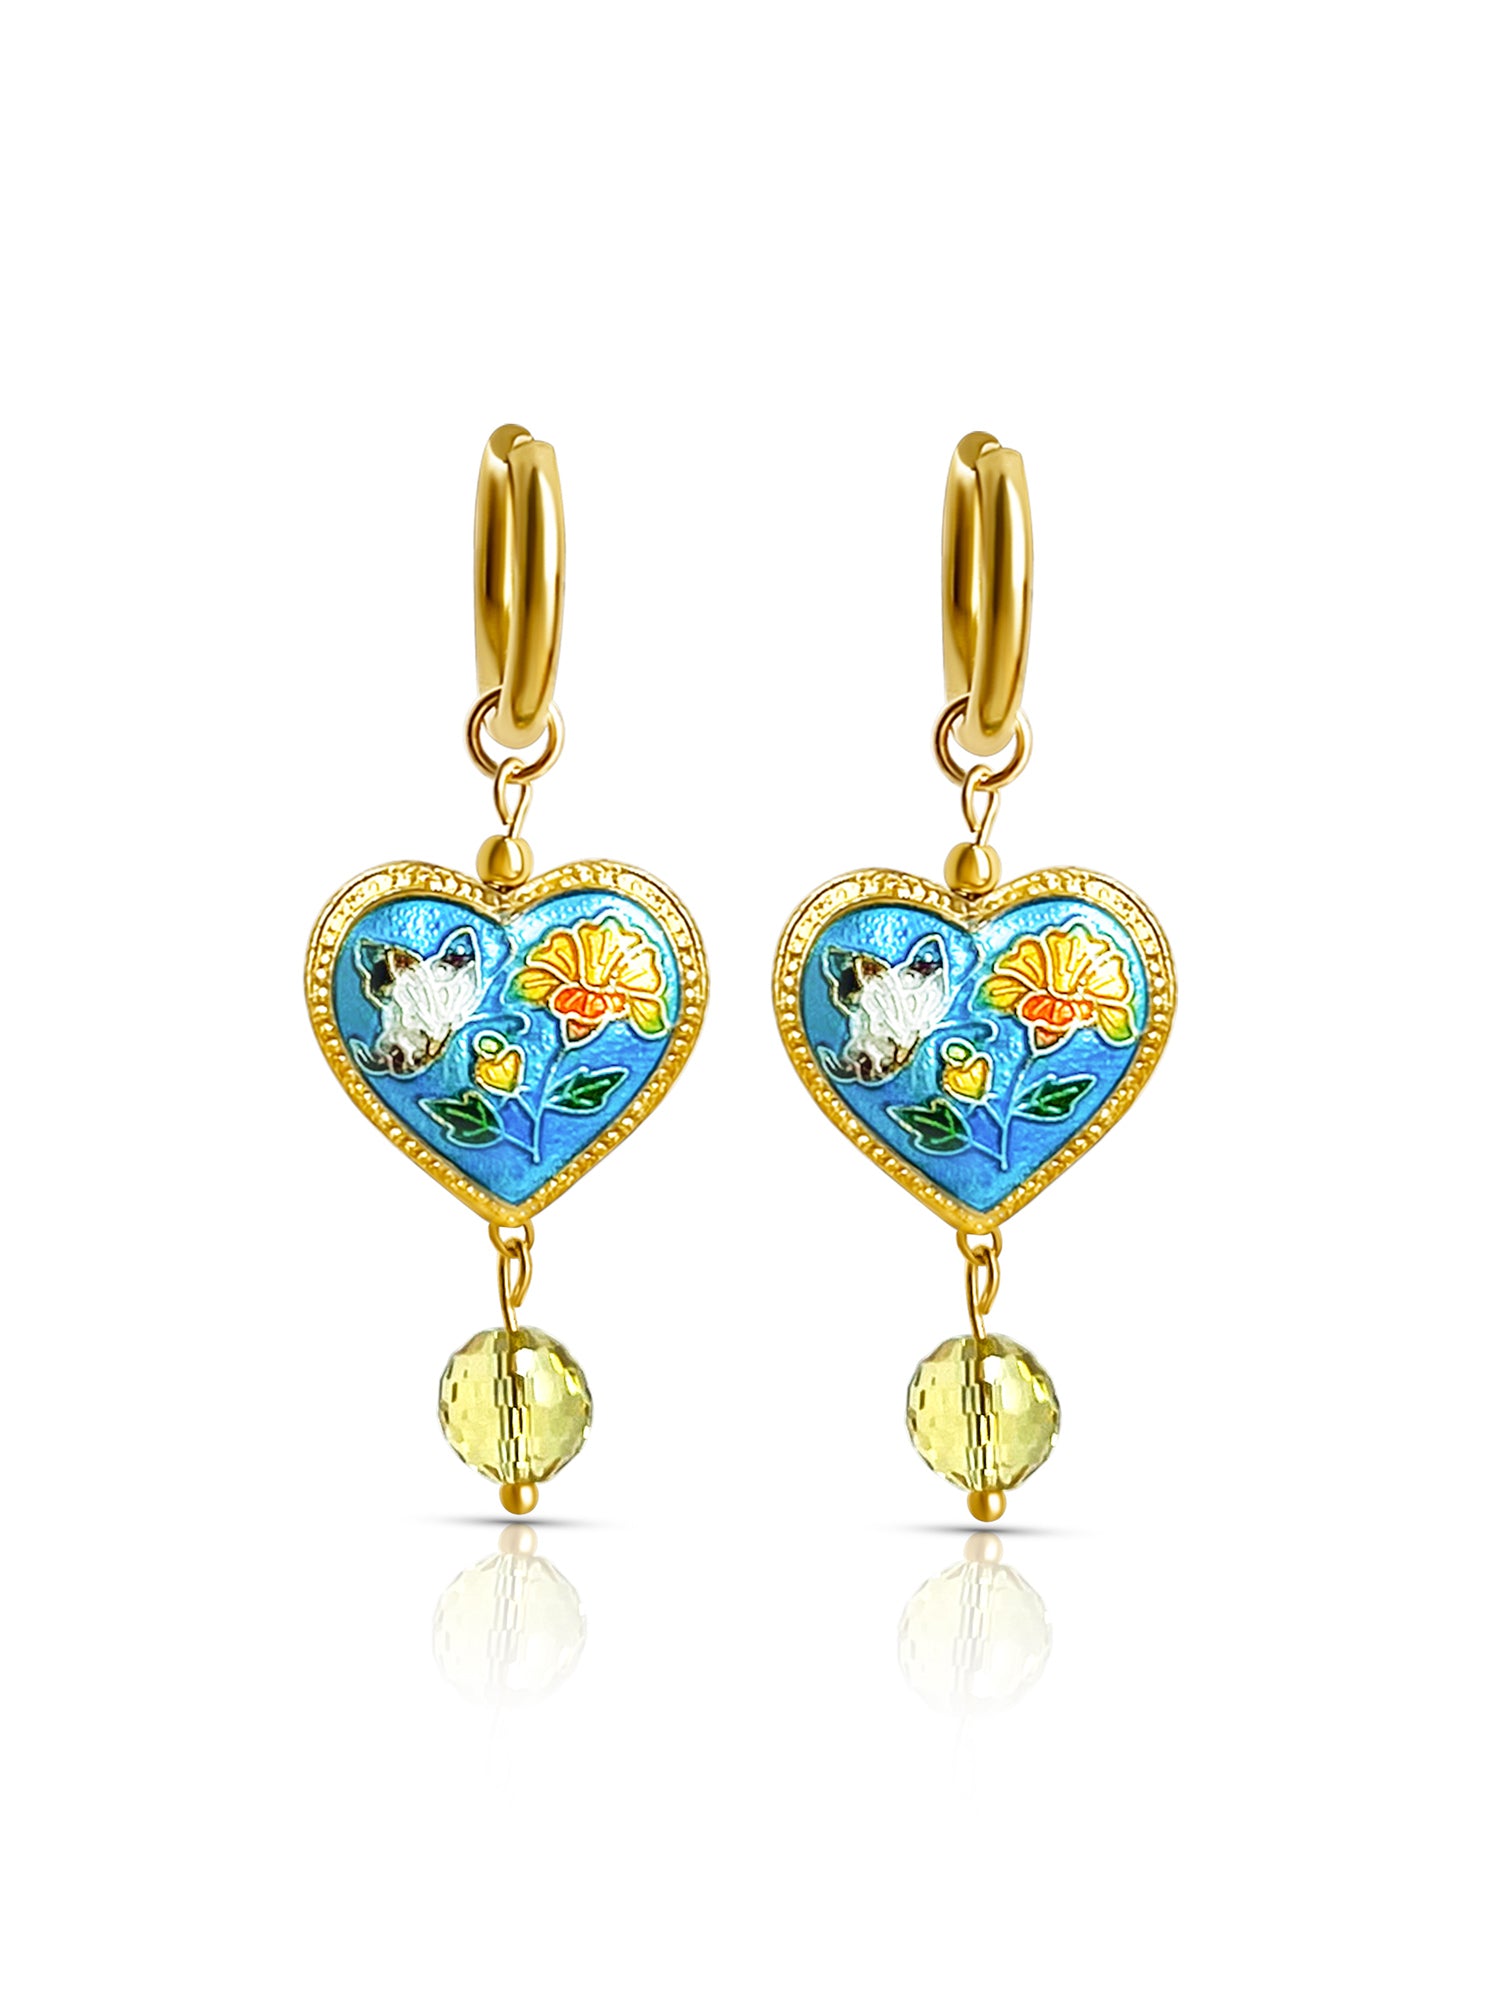 Blue Cloisonne Heart Dangling Earrings with Yellow Glass Crystal